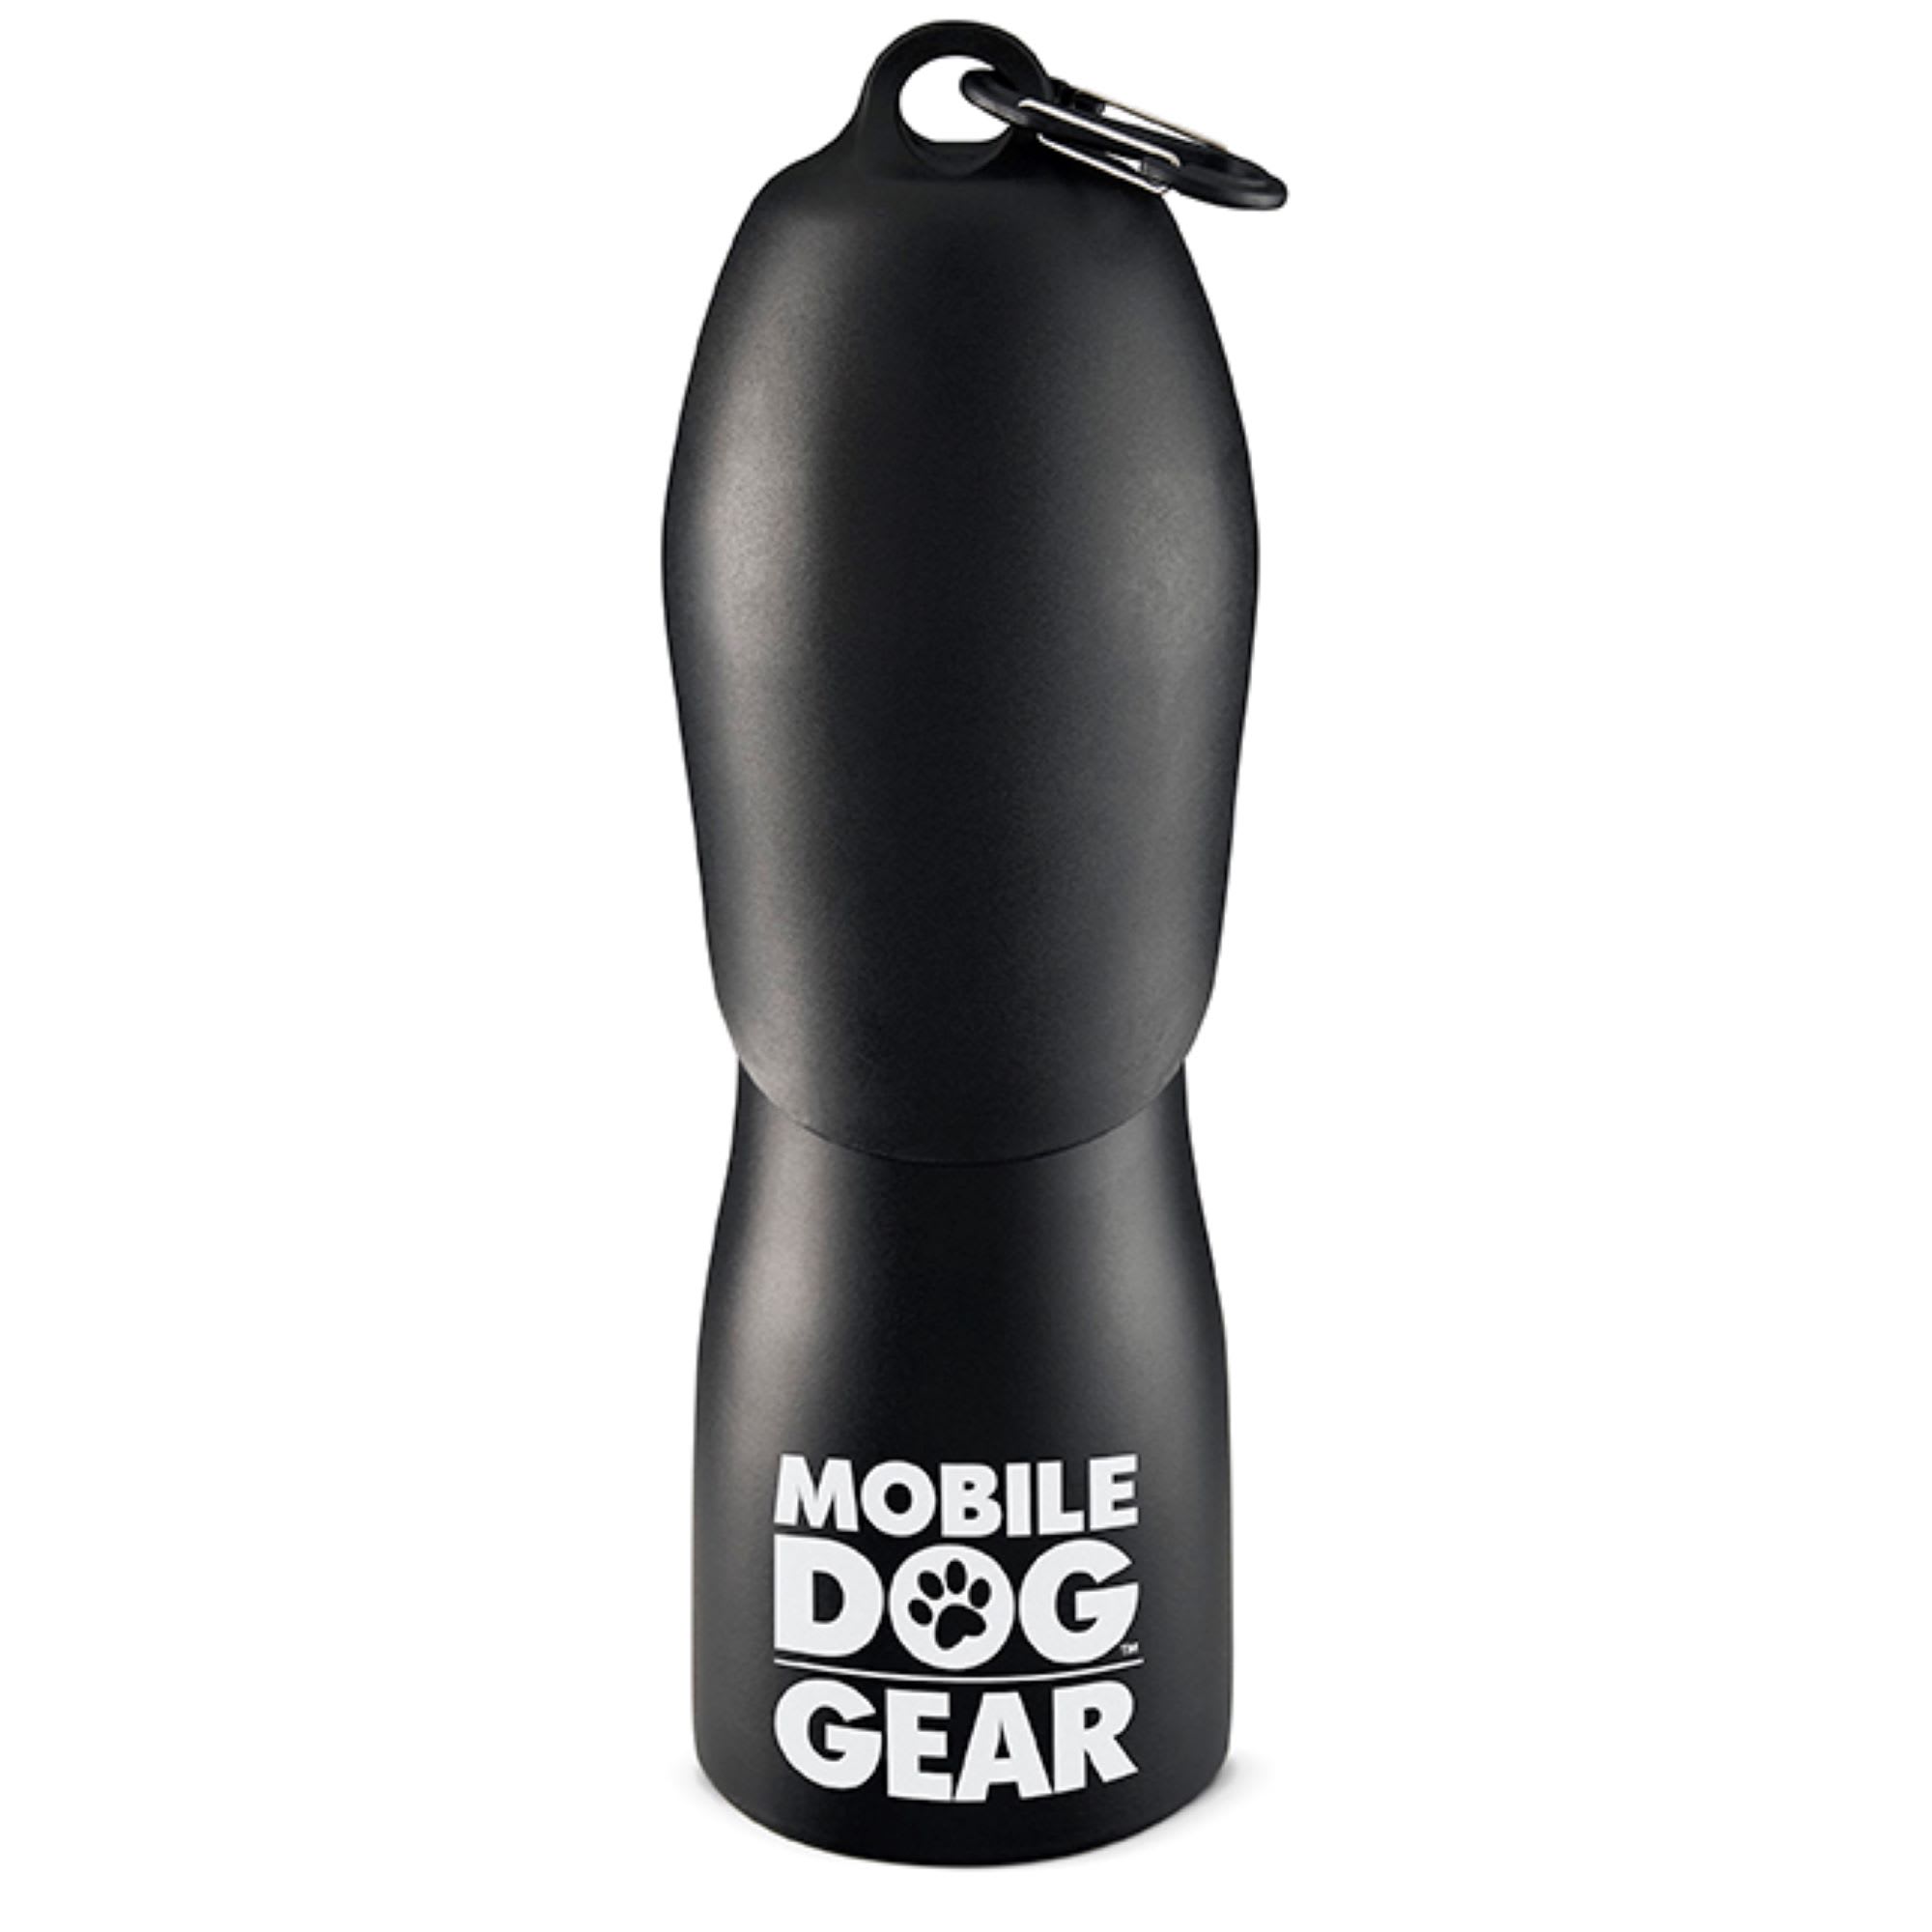 Photos - Baby Bottle / Sippy Cup Mobile Dog Gear Mobile Dog Gear Black Water Bottle, 25 oz., Medium/Large,